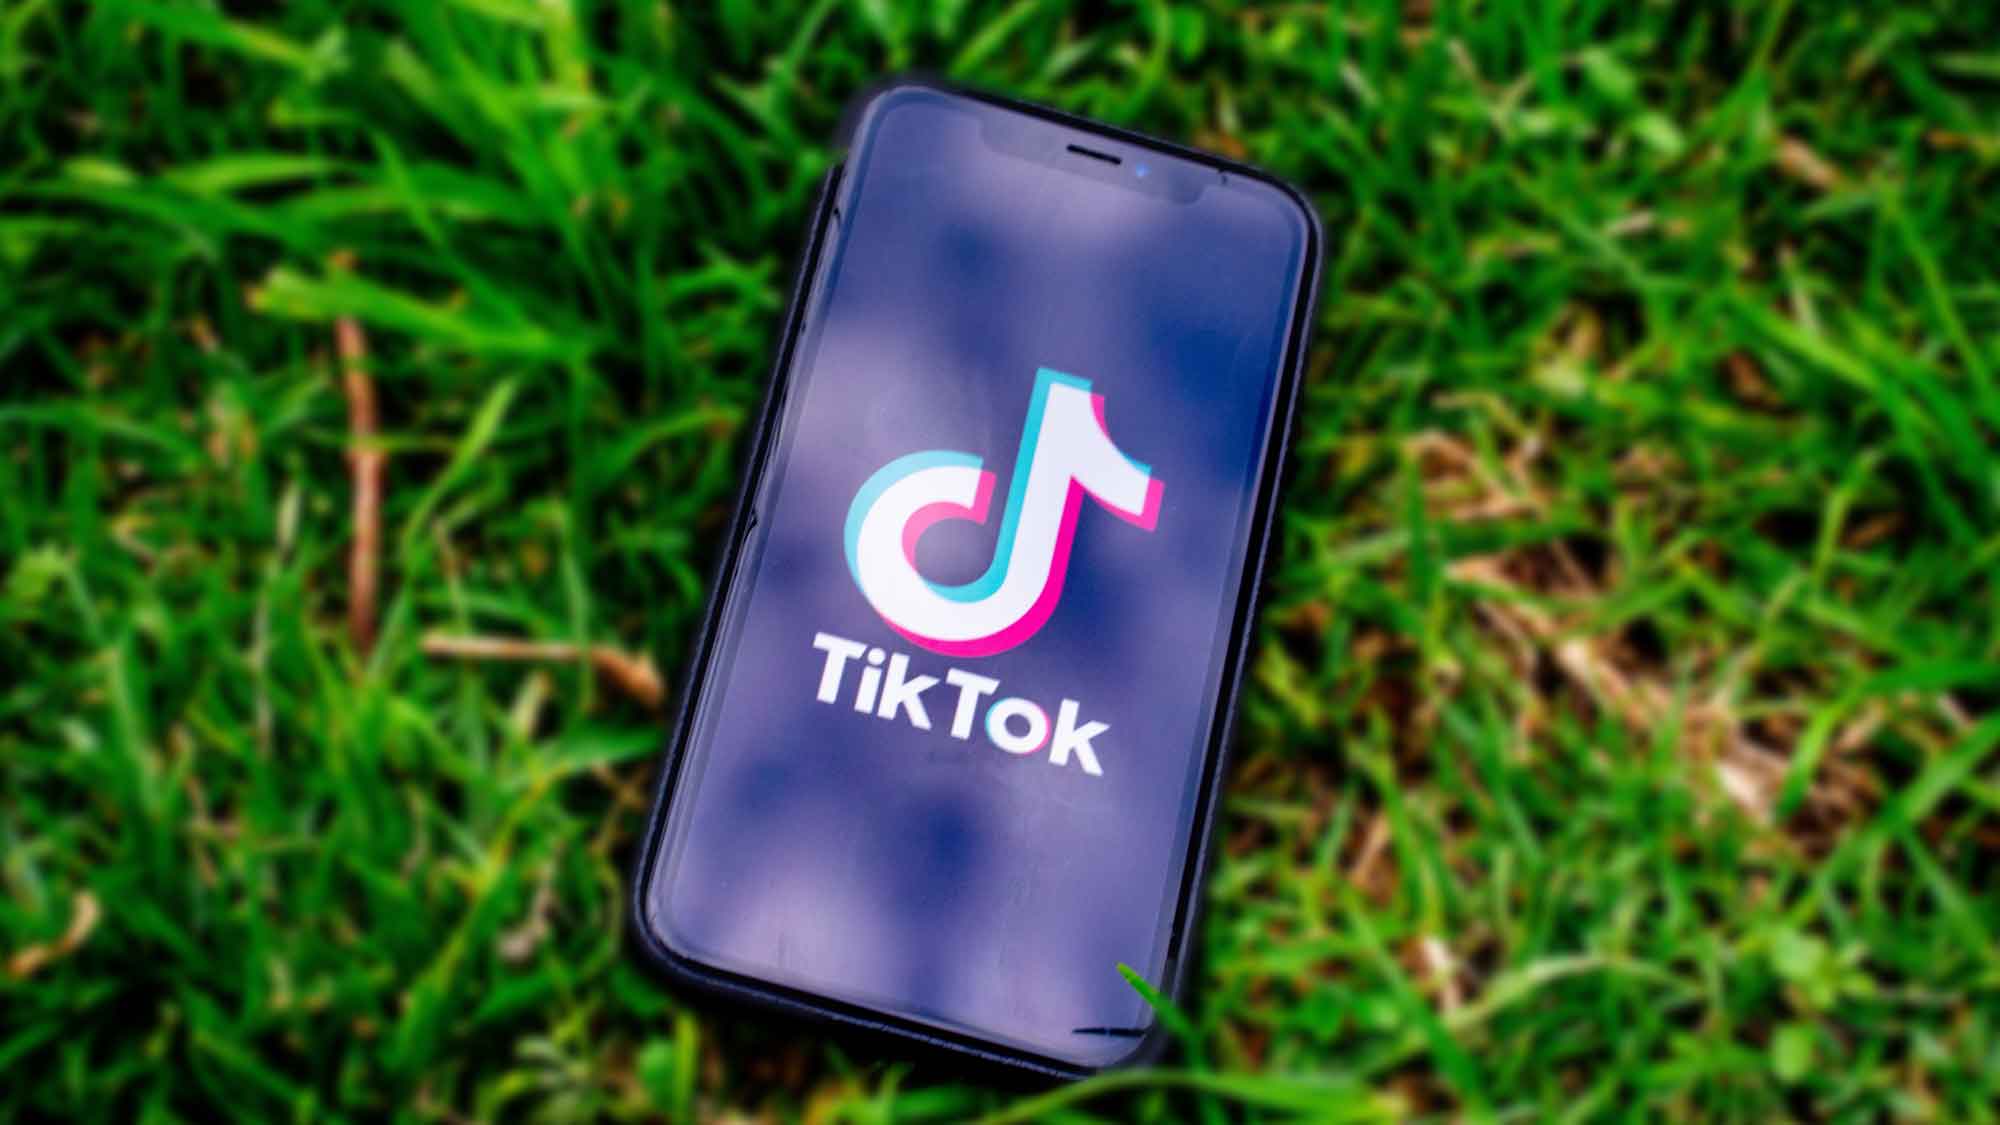 Who Will Buy TikTok? Microsoft, Twitter, Facebook, Google, Oracle, Or Someone Else?